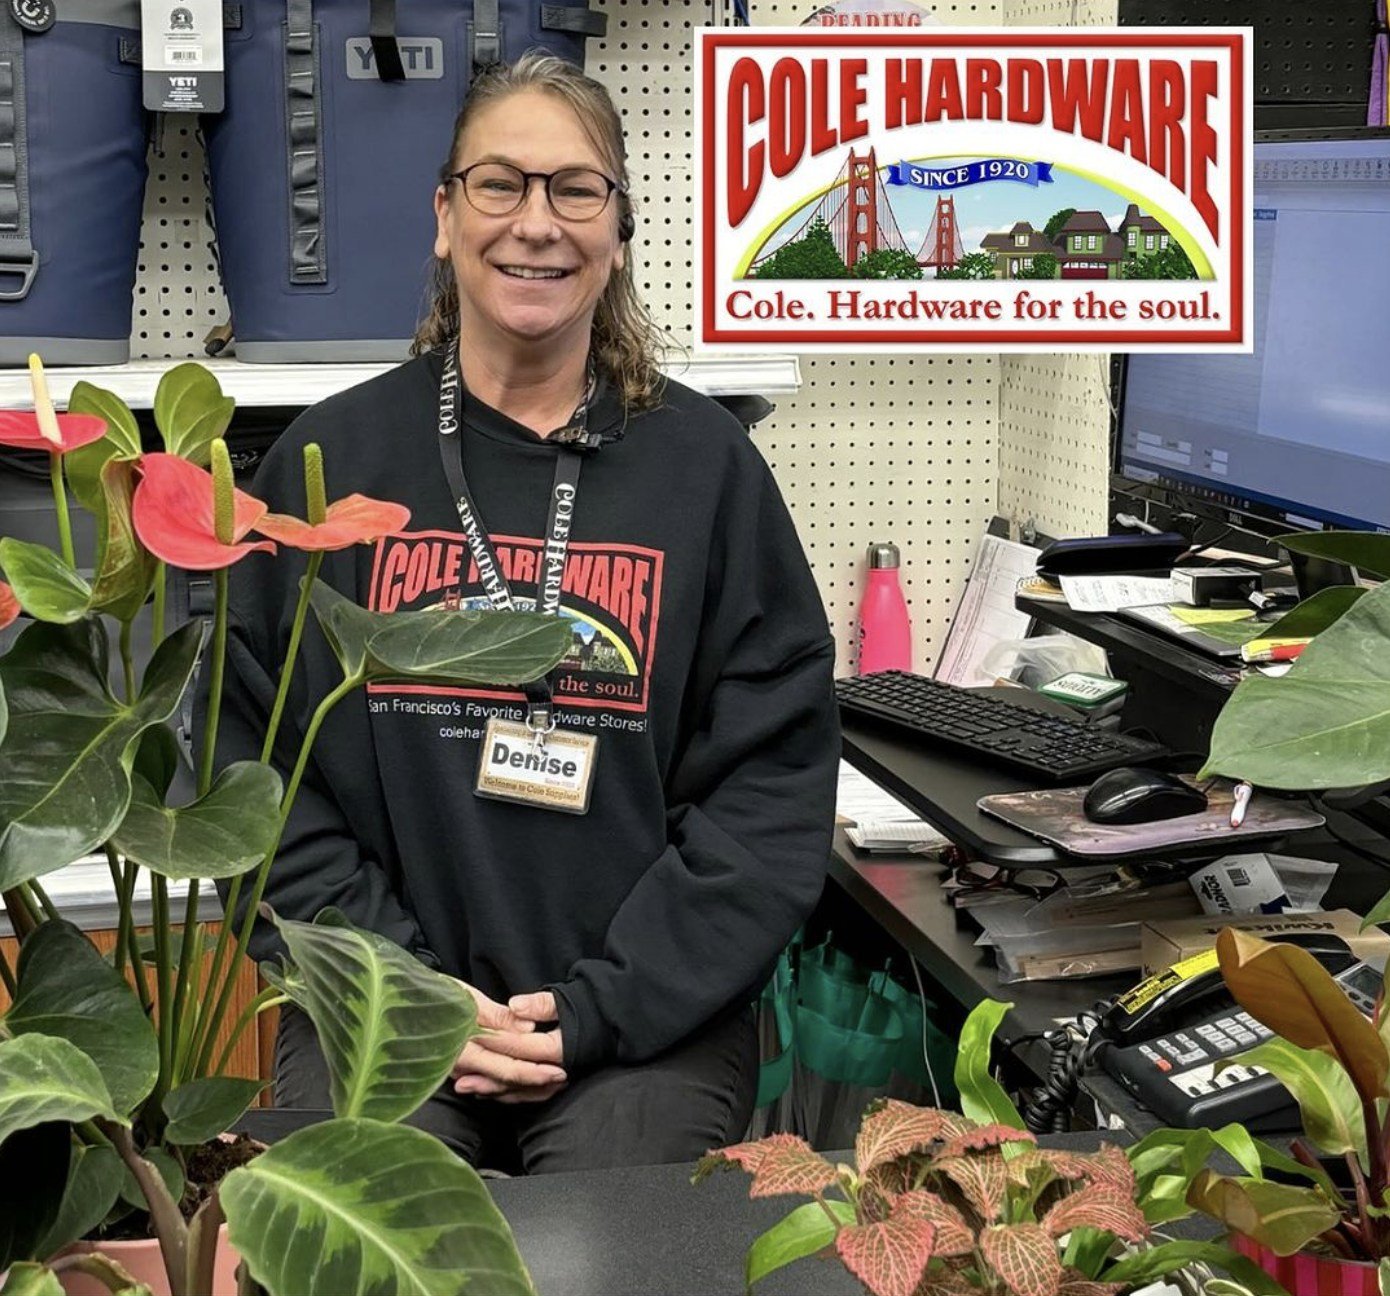 We are so fortunate to have a great, locally-owned hardware store in the neighborhood! Next time you need some cleaning supplies, plants, dog toys, gardening tools, grills, light bulbs, hand tools, or whatever home improvement project you've been put